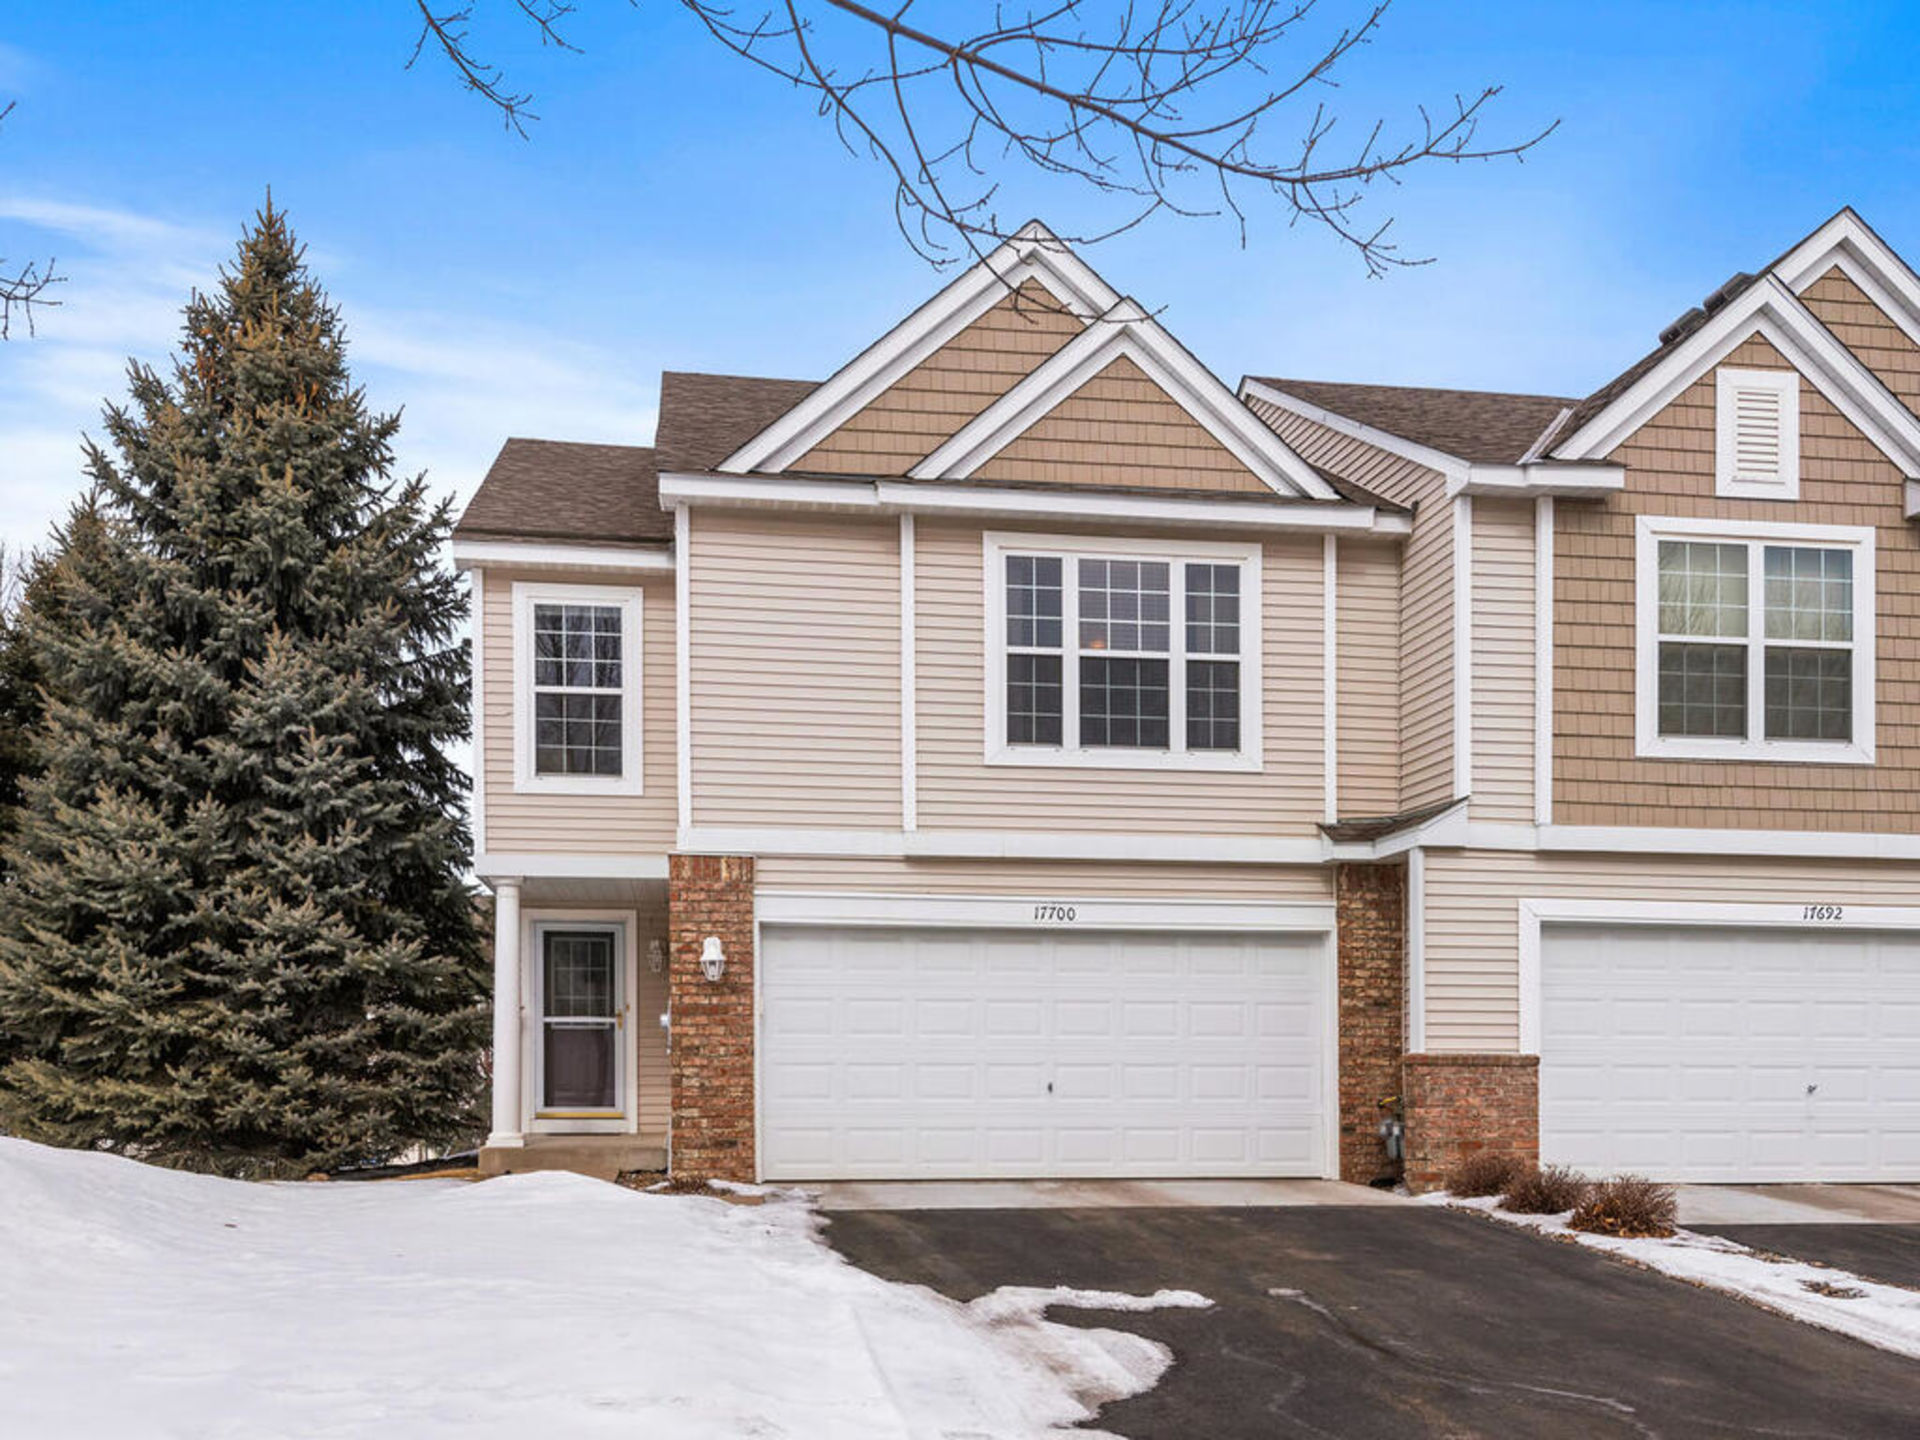 17700 70th Place N | Maple Grove, MN